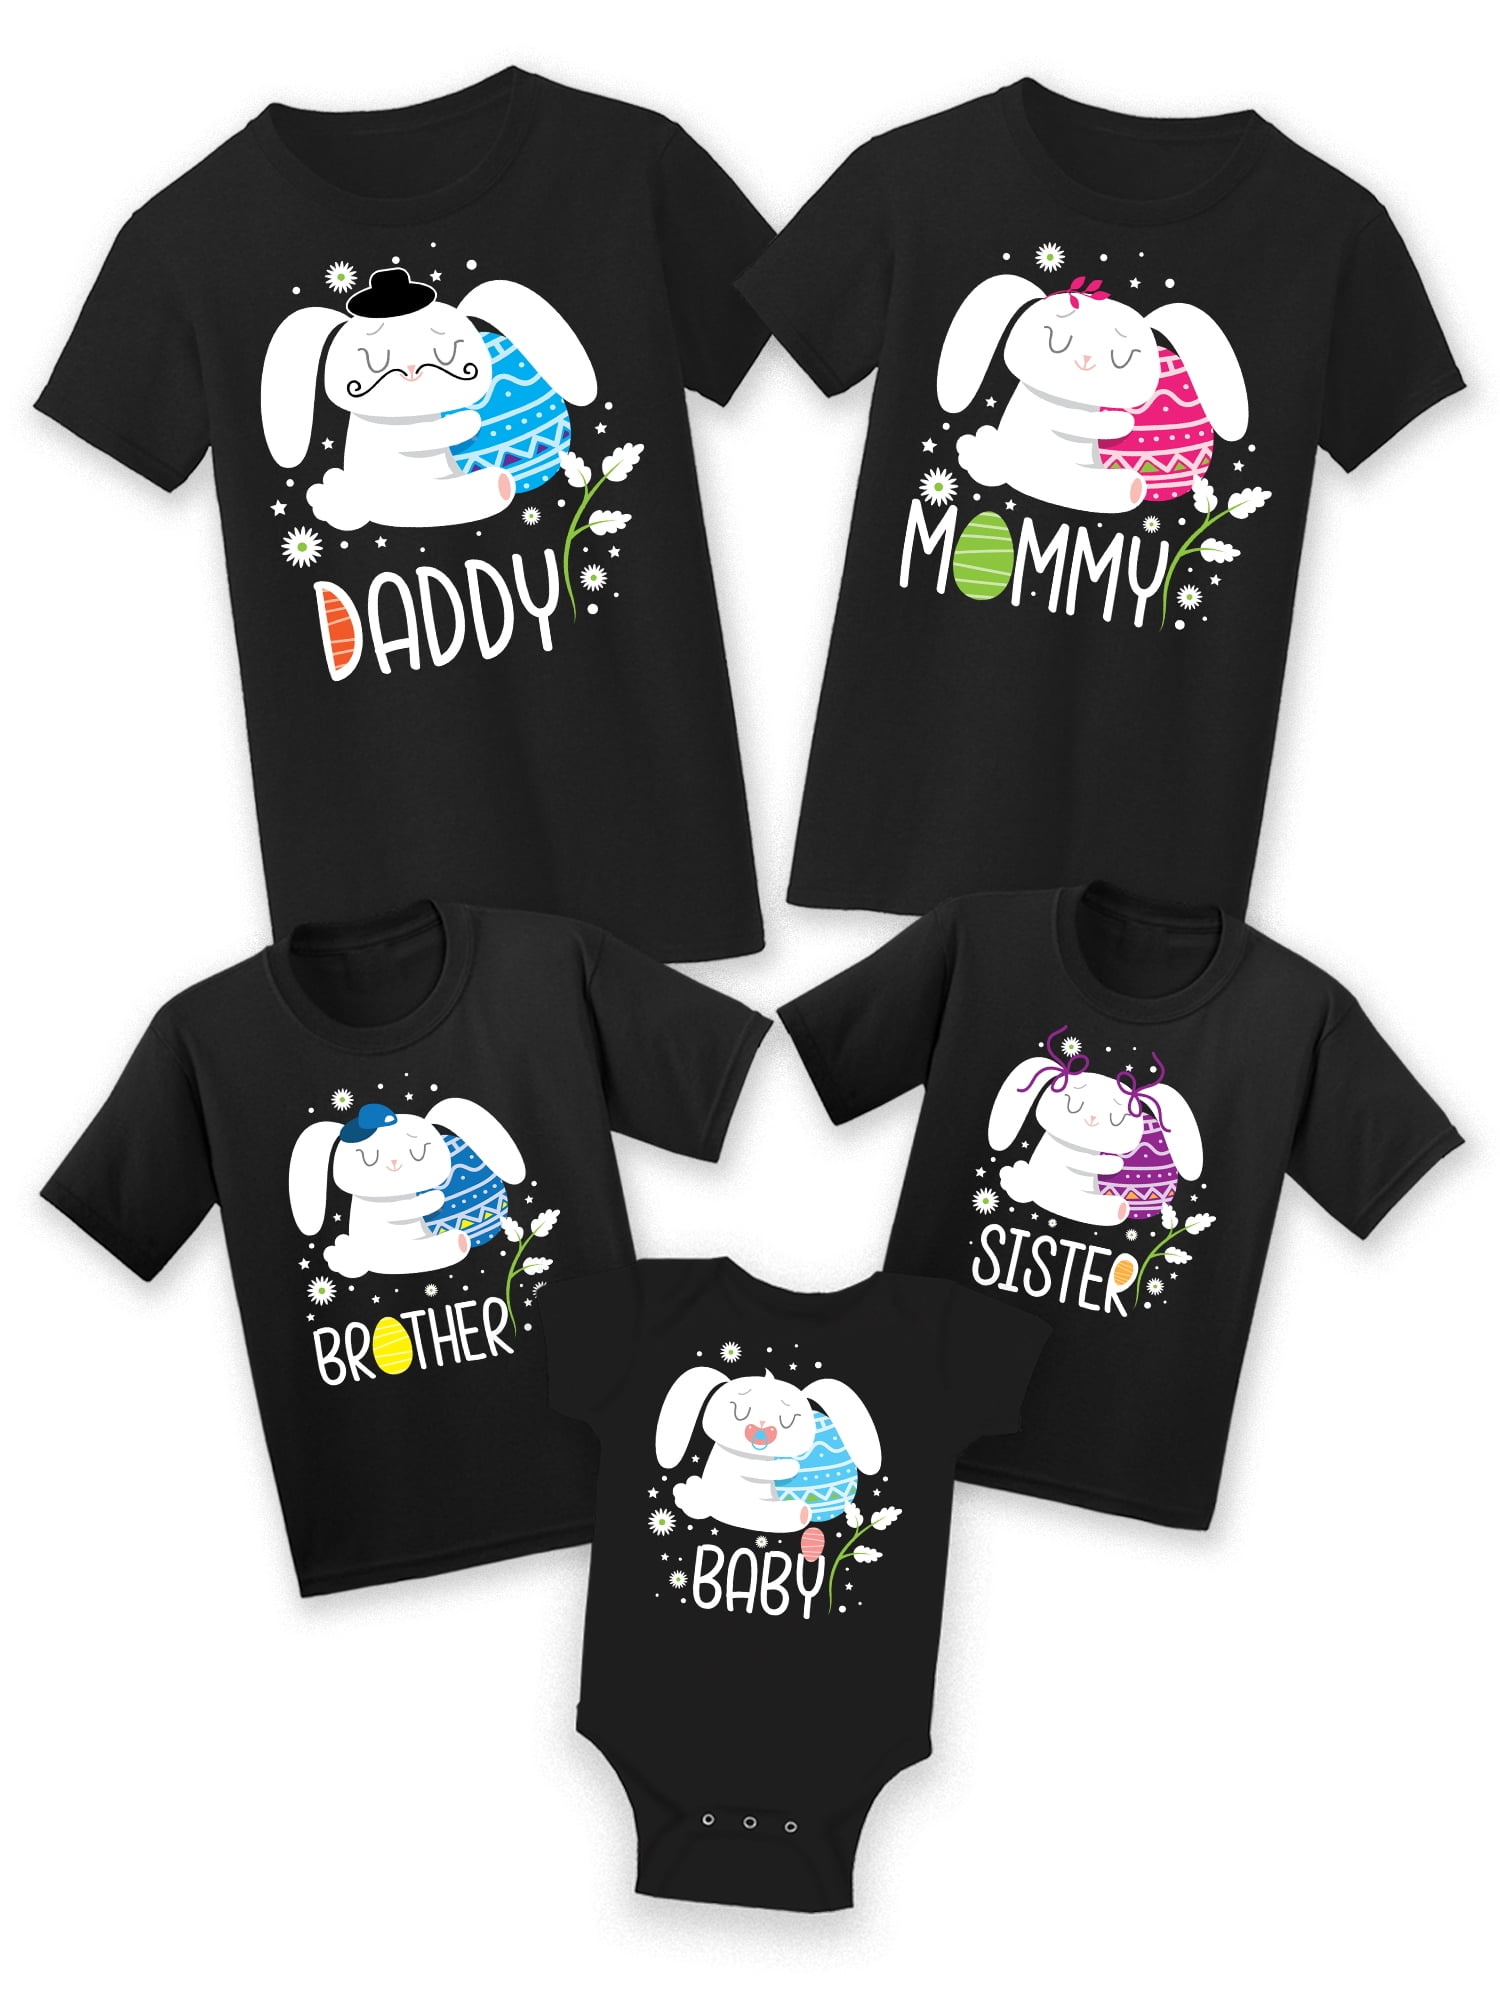 Easter Eggs Siblings shirts Brother and sister shirt Custom youth Easter shirts